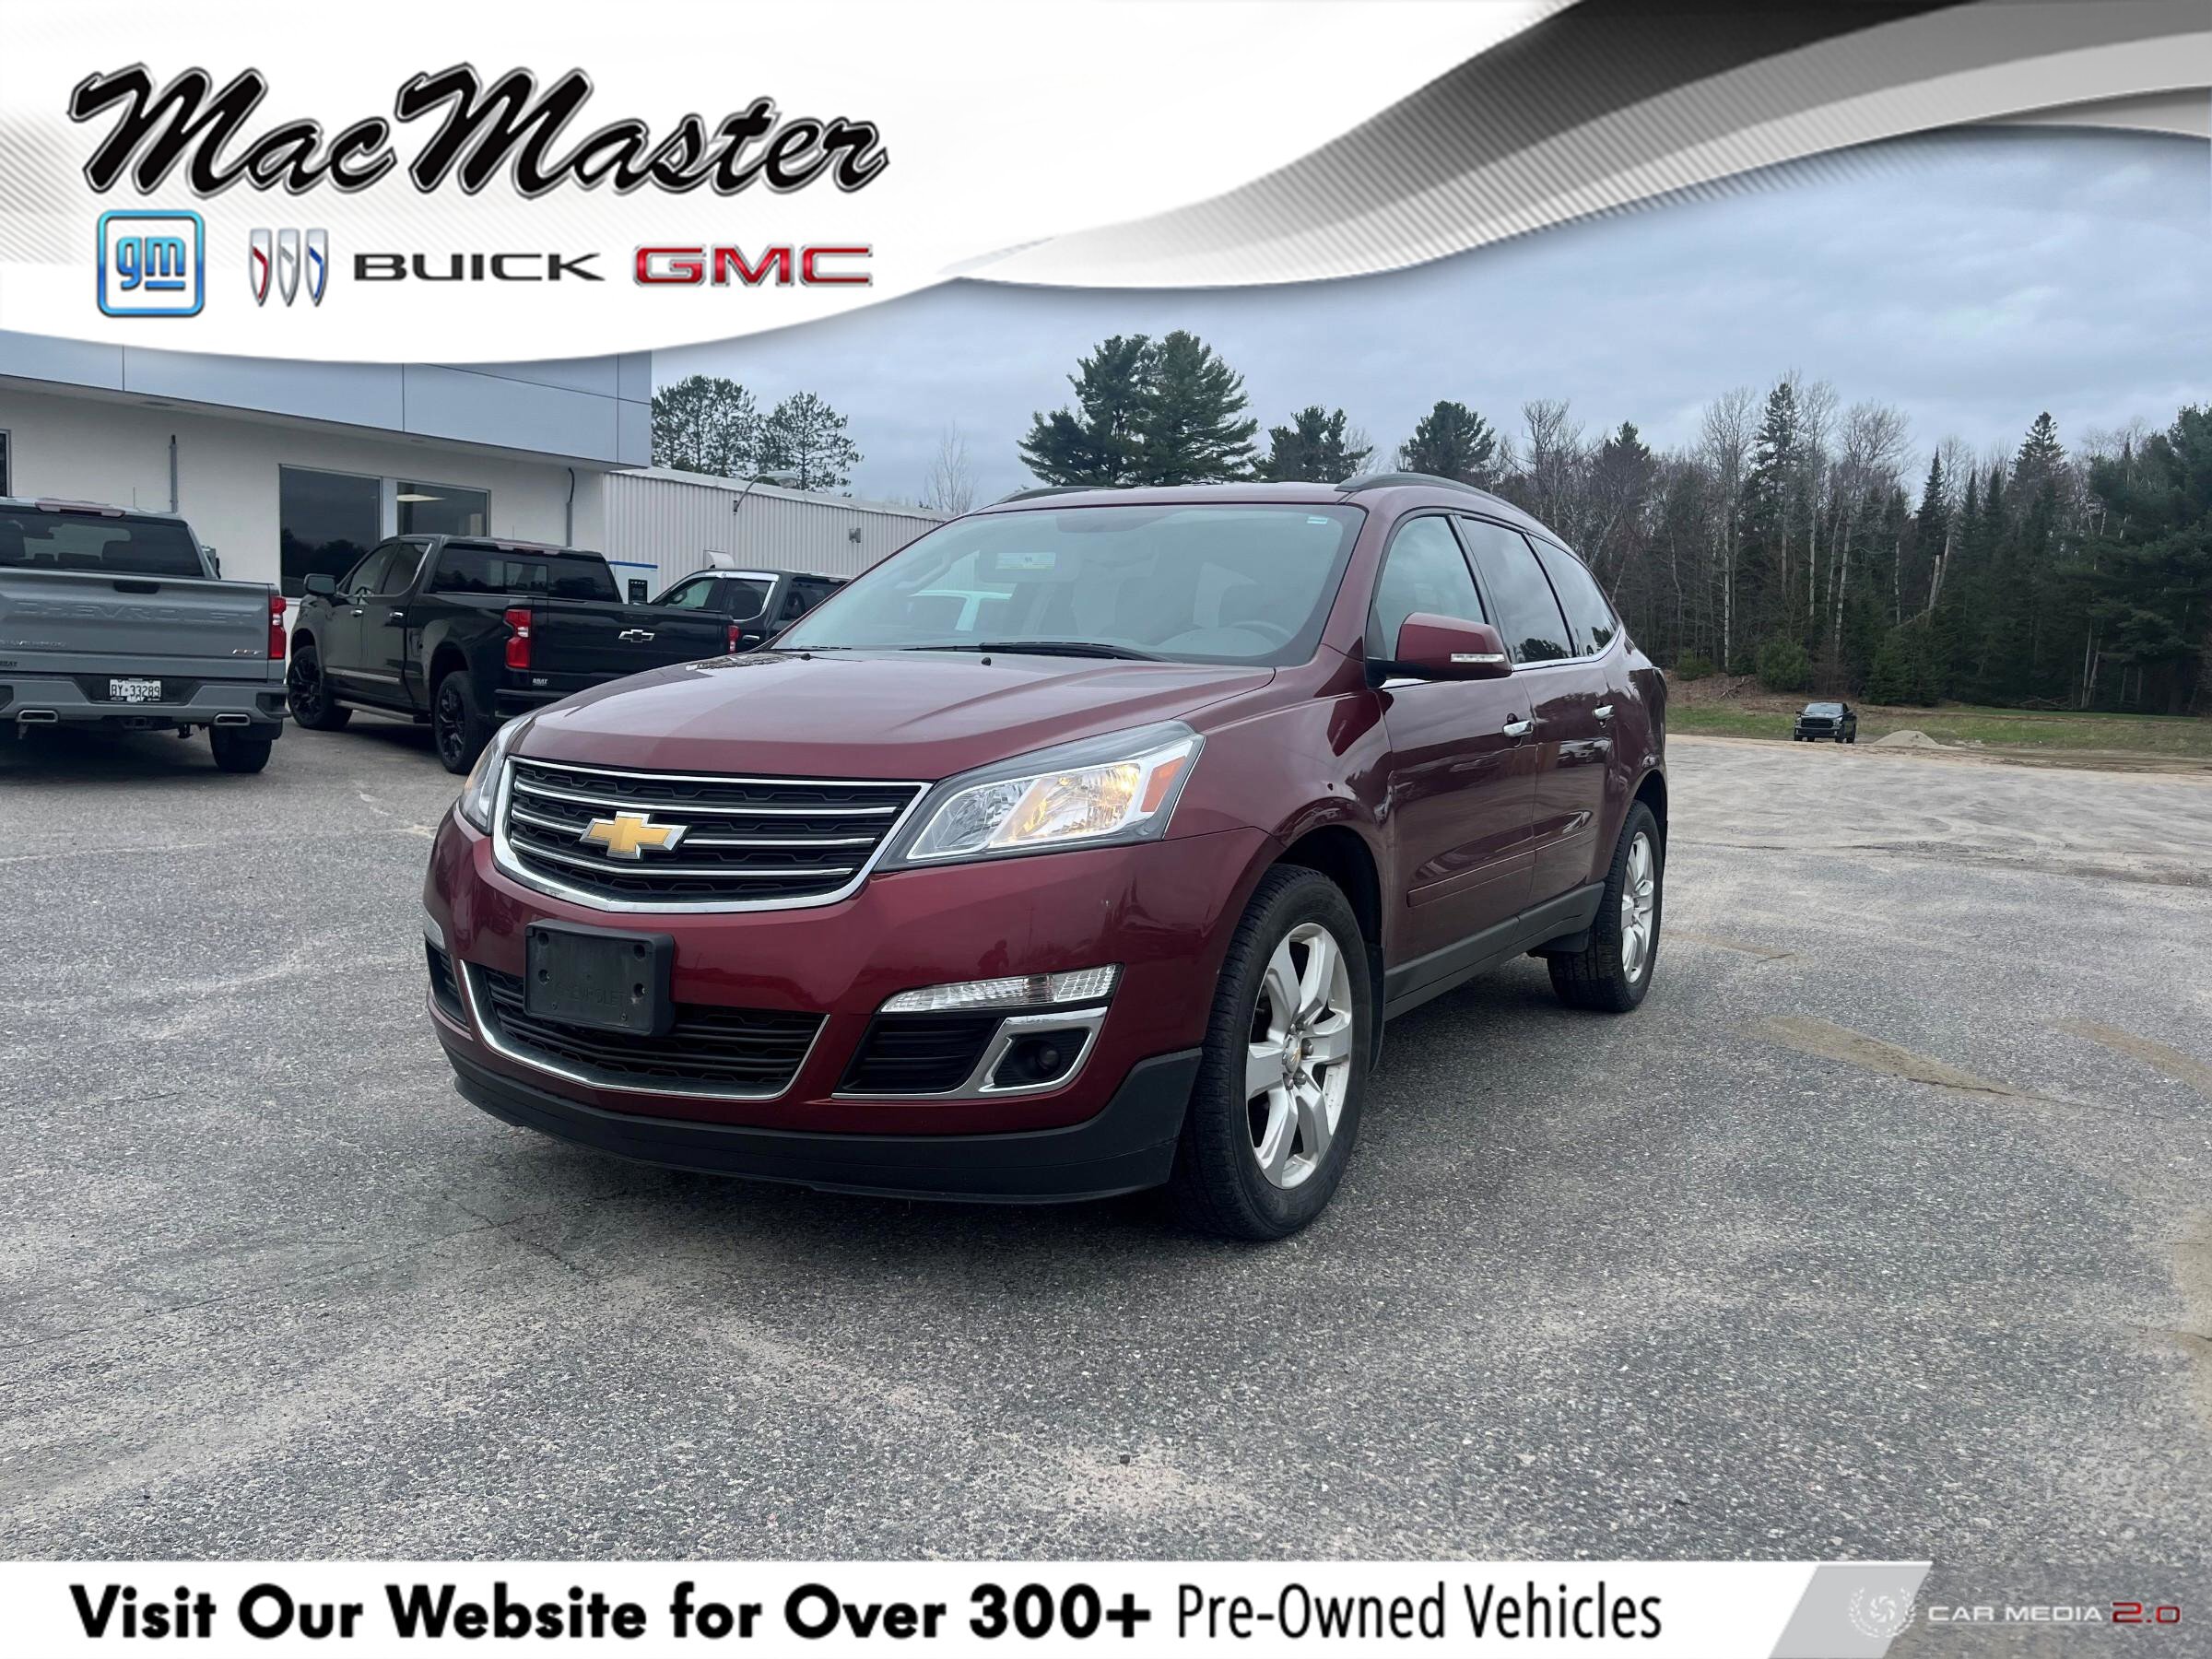 2017 Chevrolet Traverse LT CERTIFIED PRE-OWNED | 1-OWNER | CLEAN CARFAX | 